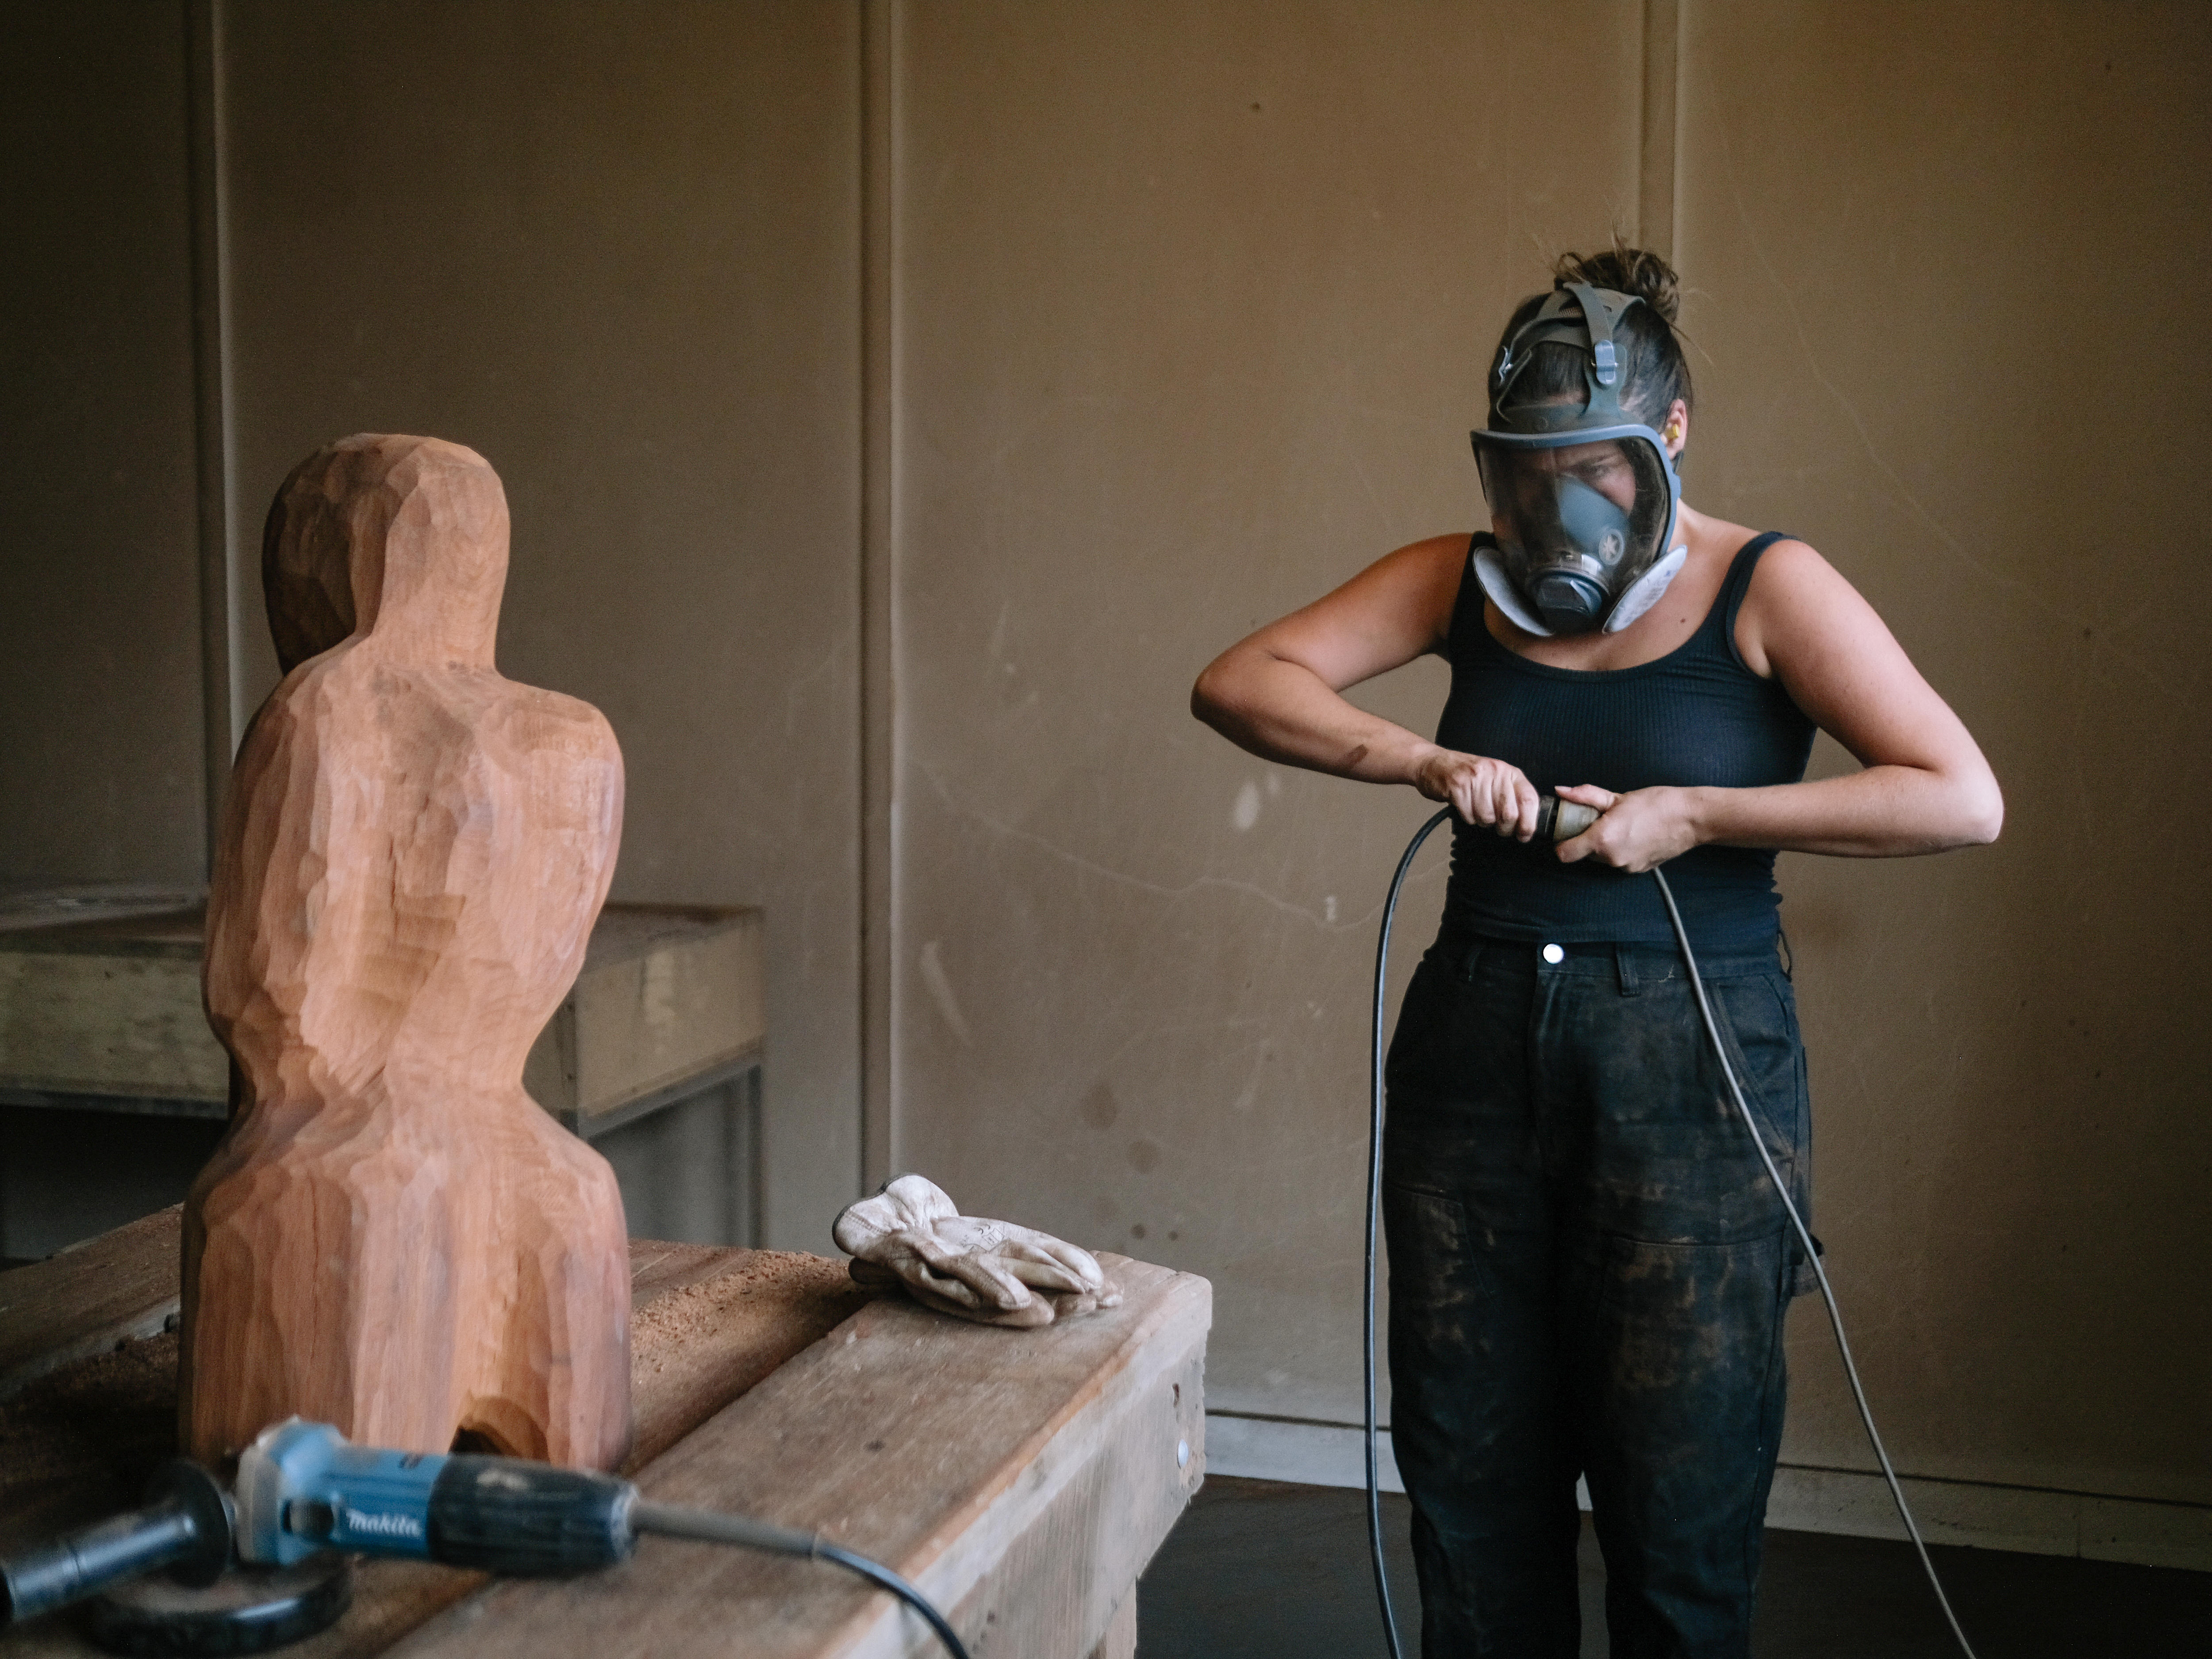 Womad with brown hair wearing black covered in wood dust after carving sculptures